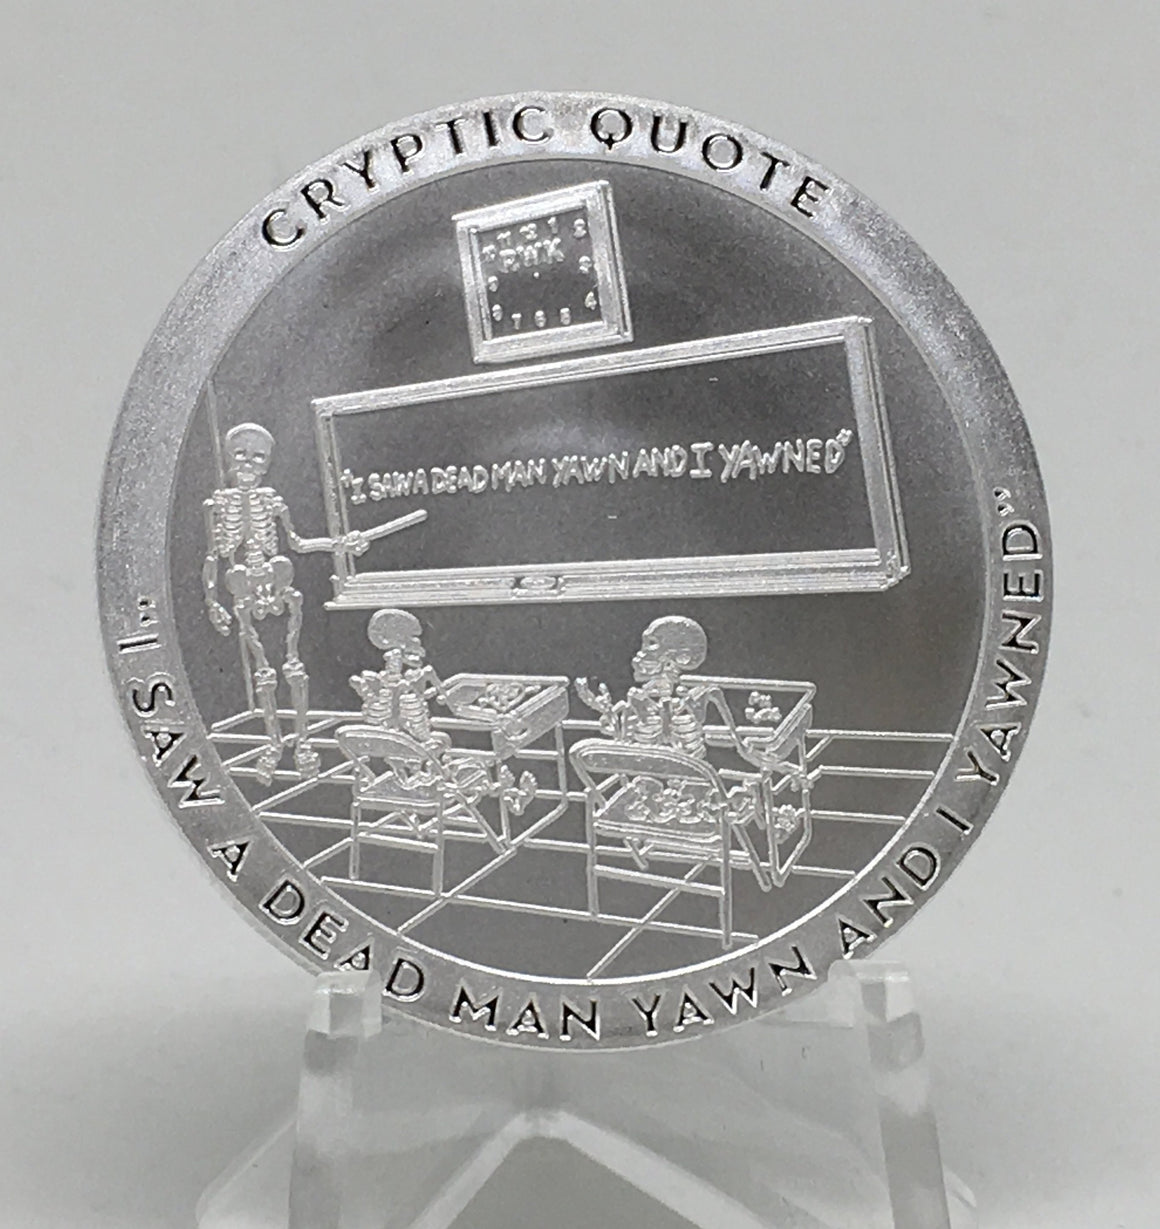 Cryptic Silver Series #1-Cryptic Quote, BU Finish by Chautauqua Silver Works, 1oz .999 Silver Round.